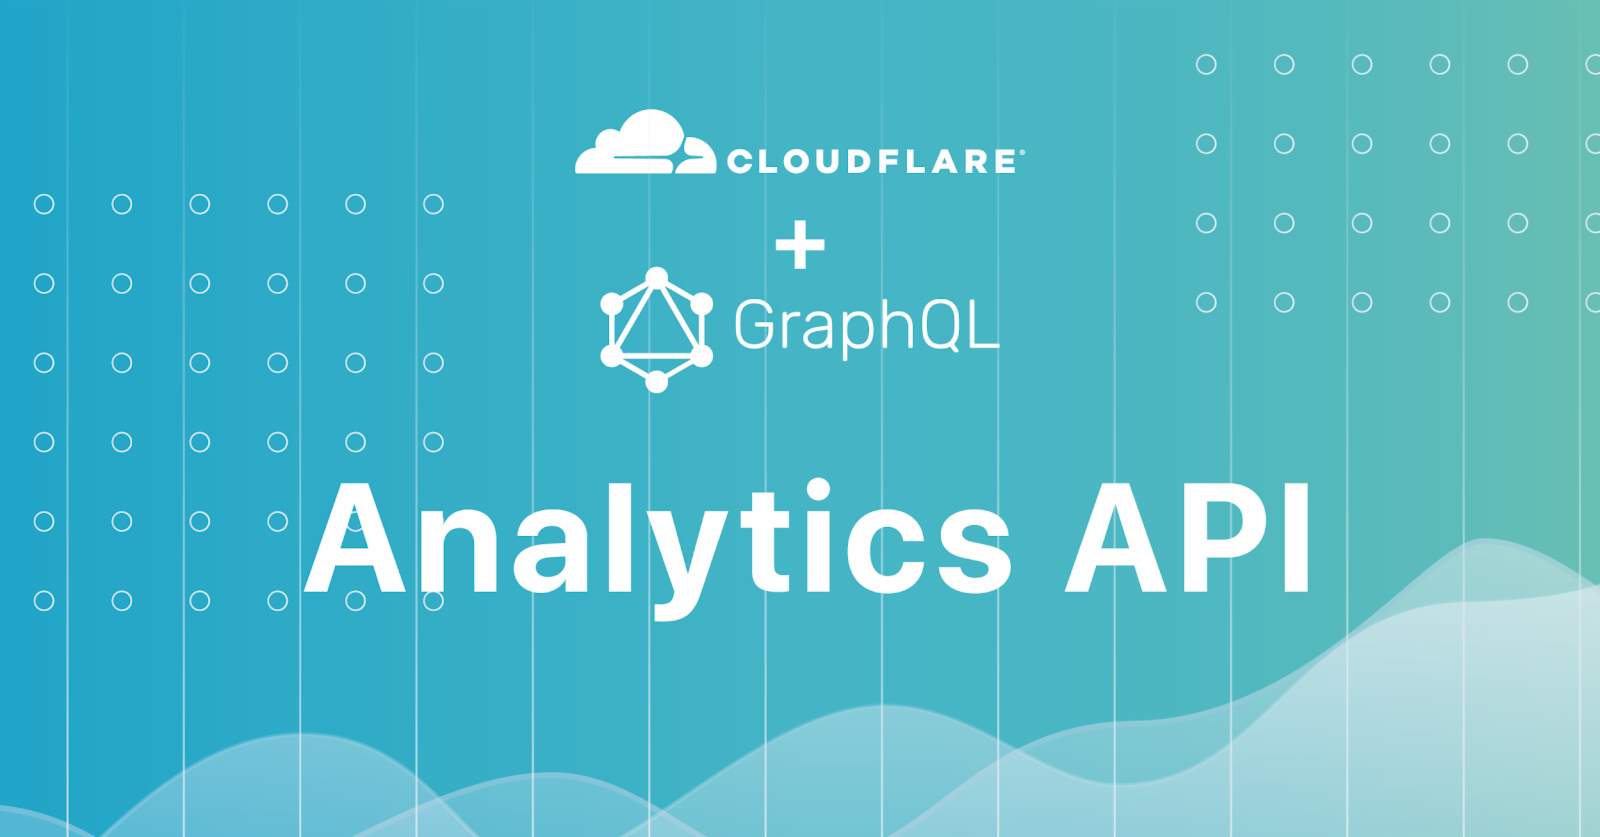 Introducing the GraphQL Analytics API: exactly the data you need, all in one place